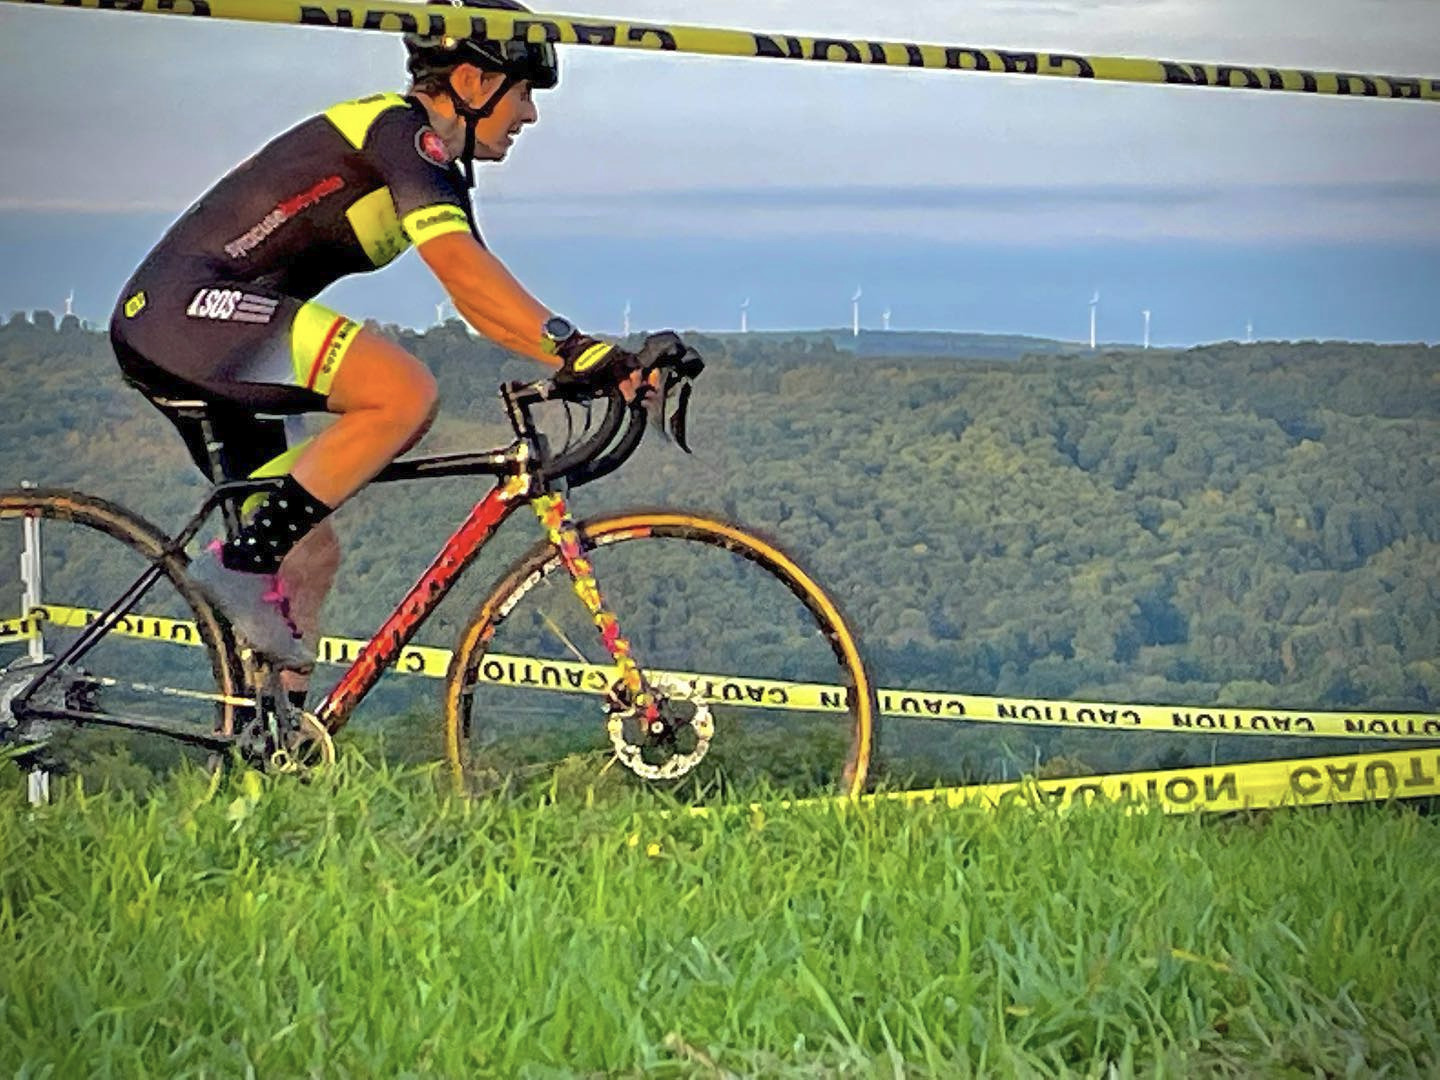 Cyclocross racer running over an obstacle.